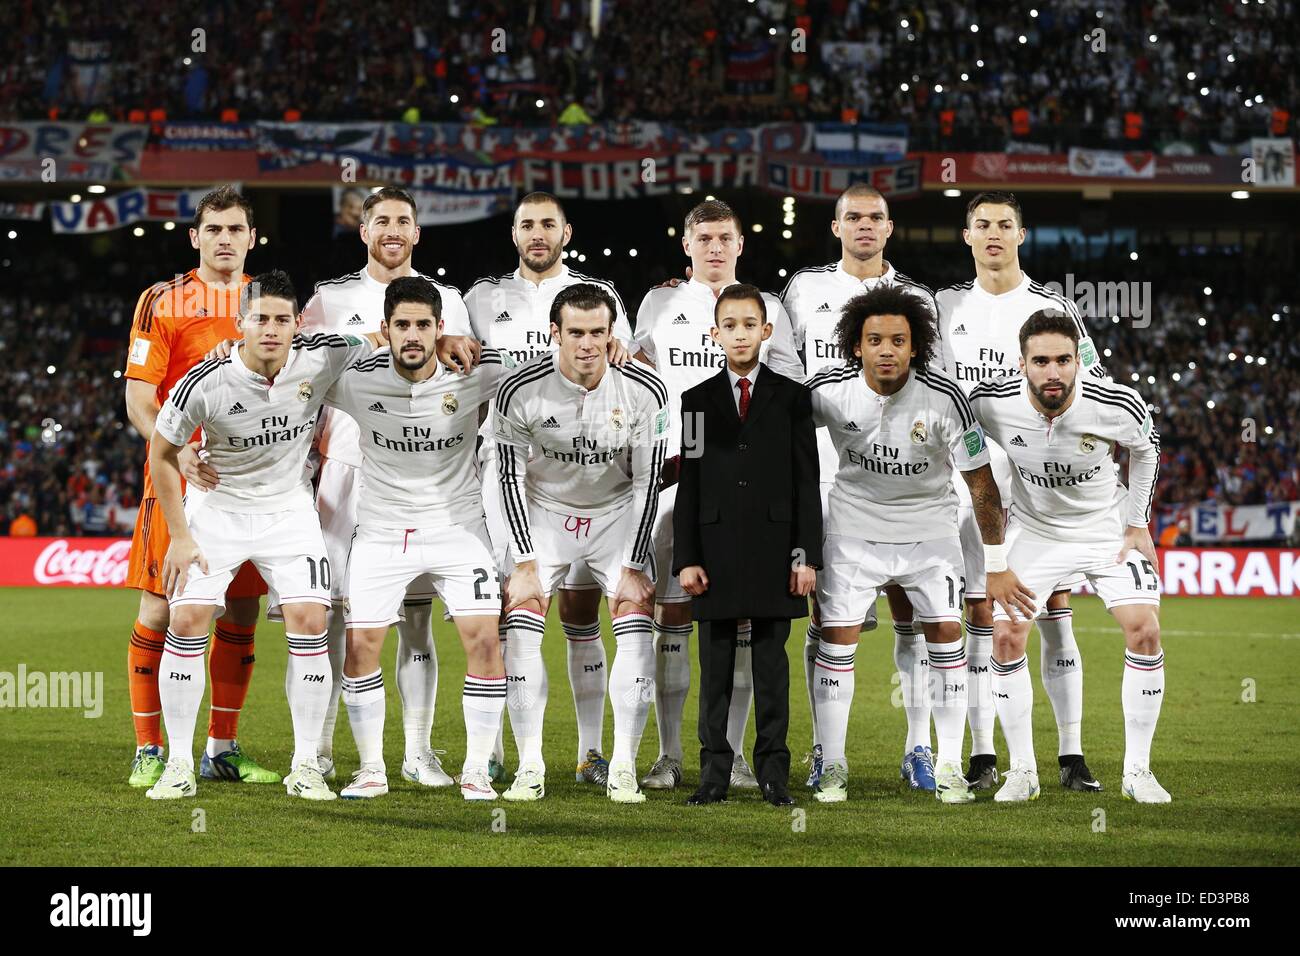 Marrakech, Morroco. 20th Dec, 2014. Real Madrid team group line-up (Real) Football/Soccer : His Royal Highness Prince Moulay Hassan, Crown Prince of Morocco with Real Madrid team group on FIFA Club World Cup Morroco 2014 final match between Real Madrid CF 2-0 CA San Lorenzo de Almagro at the Grand Stade de Marrakech in Marrakech, Morroco . © Mutsu Kawamori/AFLO/Alamy Live News Stock Photo